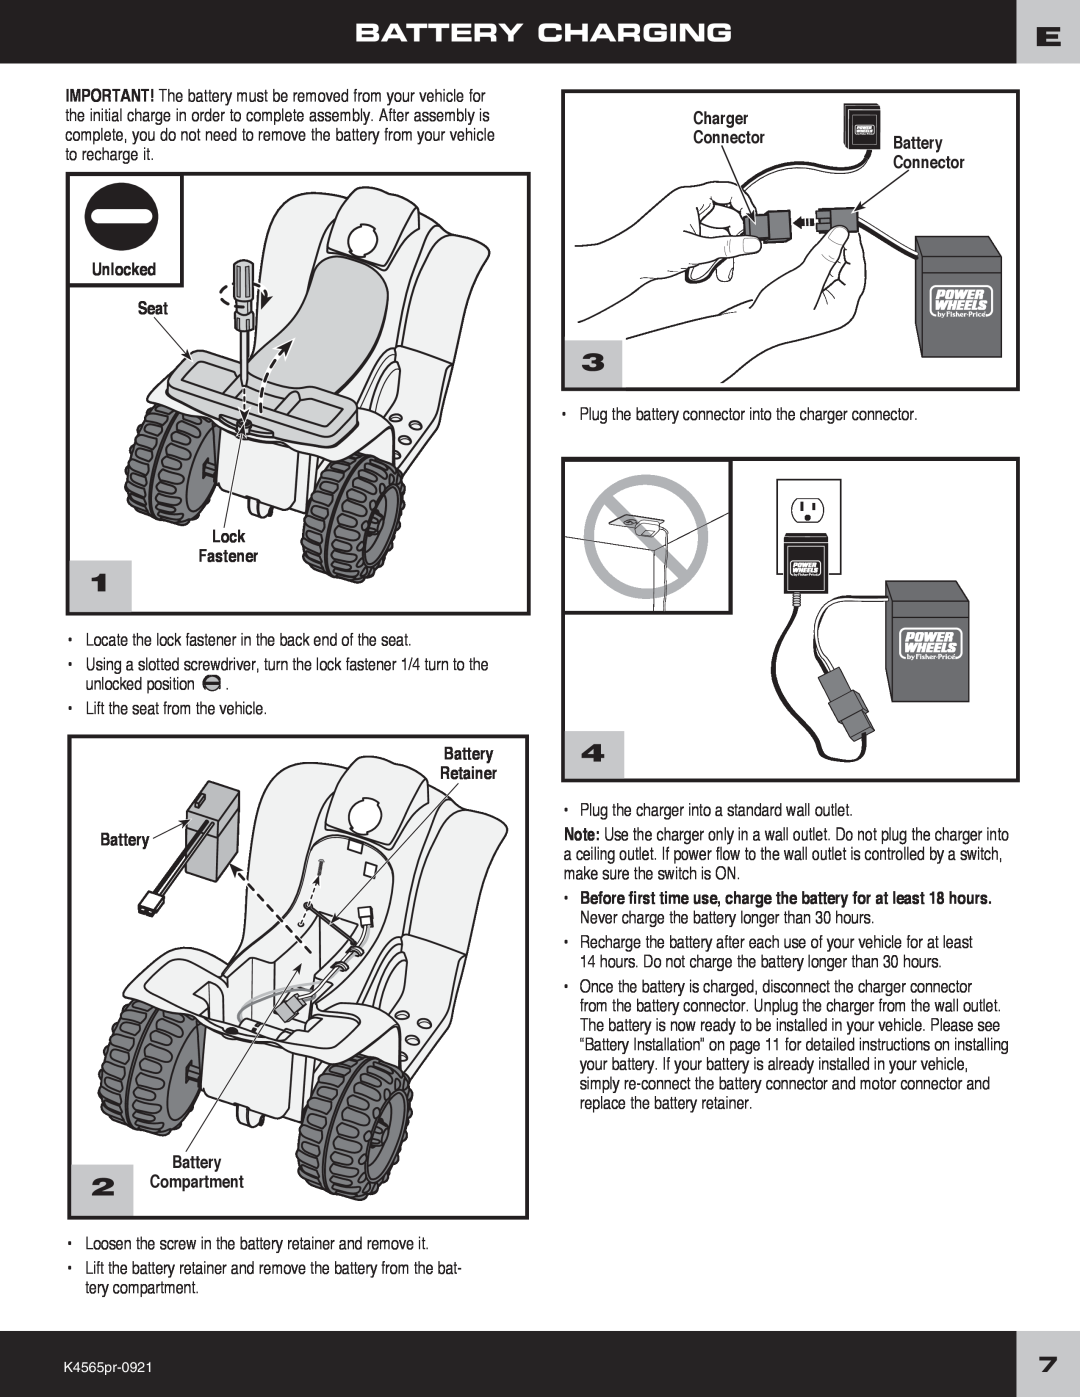 Fisher-Price K4565 owner manual Battery Charging, Seat, Charger Connector Battery Connector 